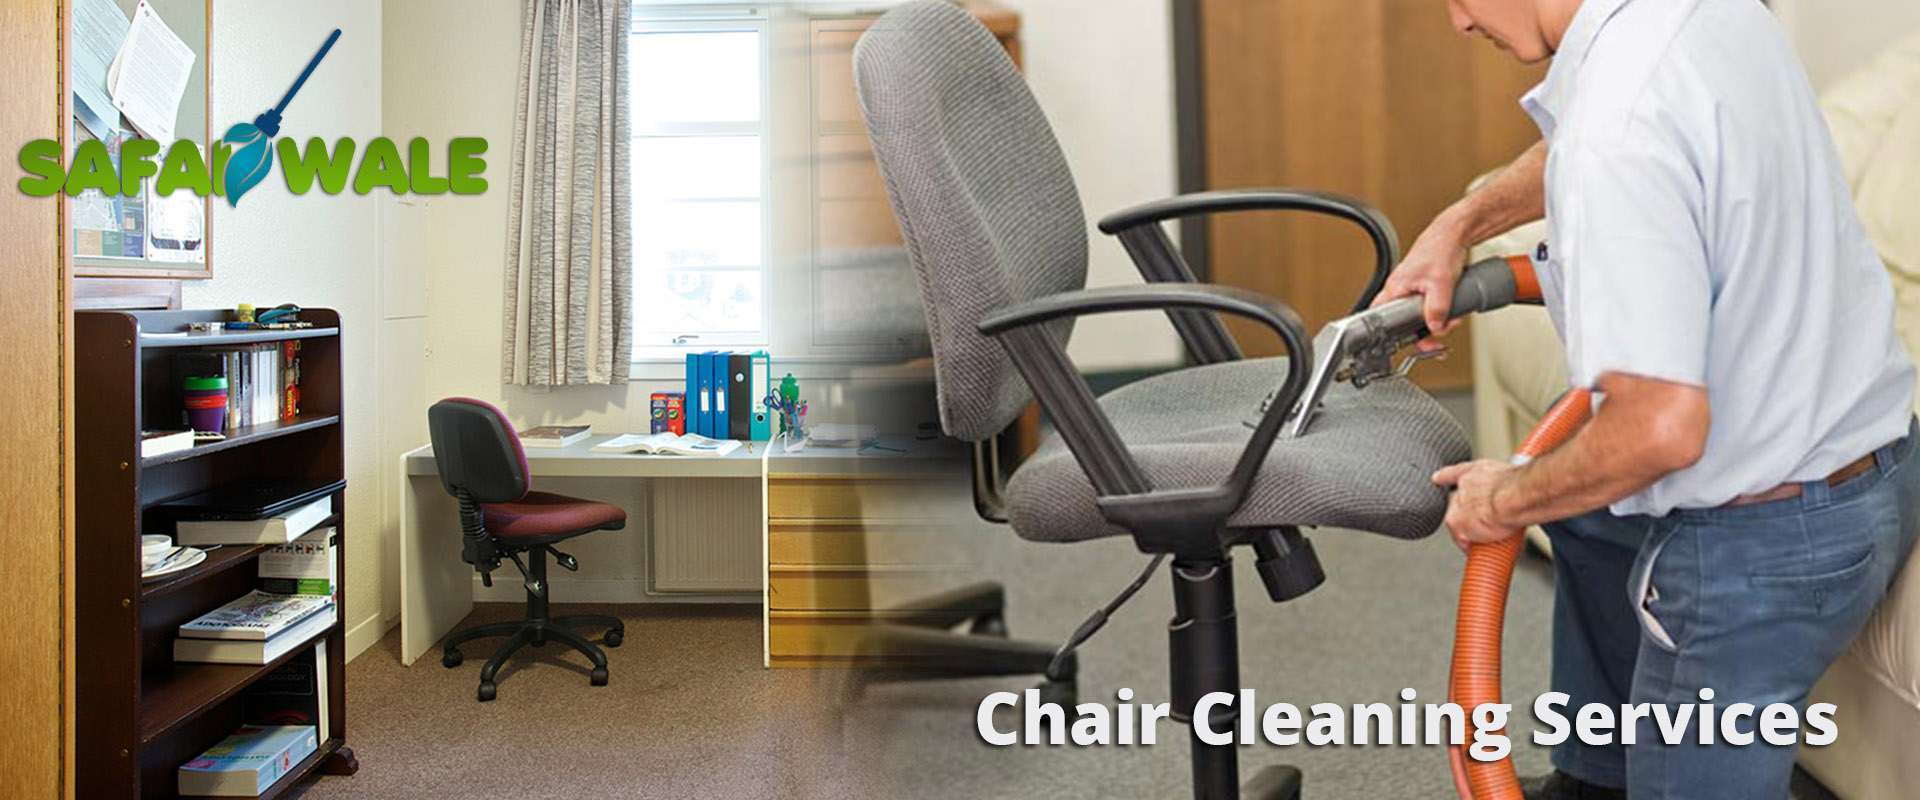 chair cleaning services in vaishali